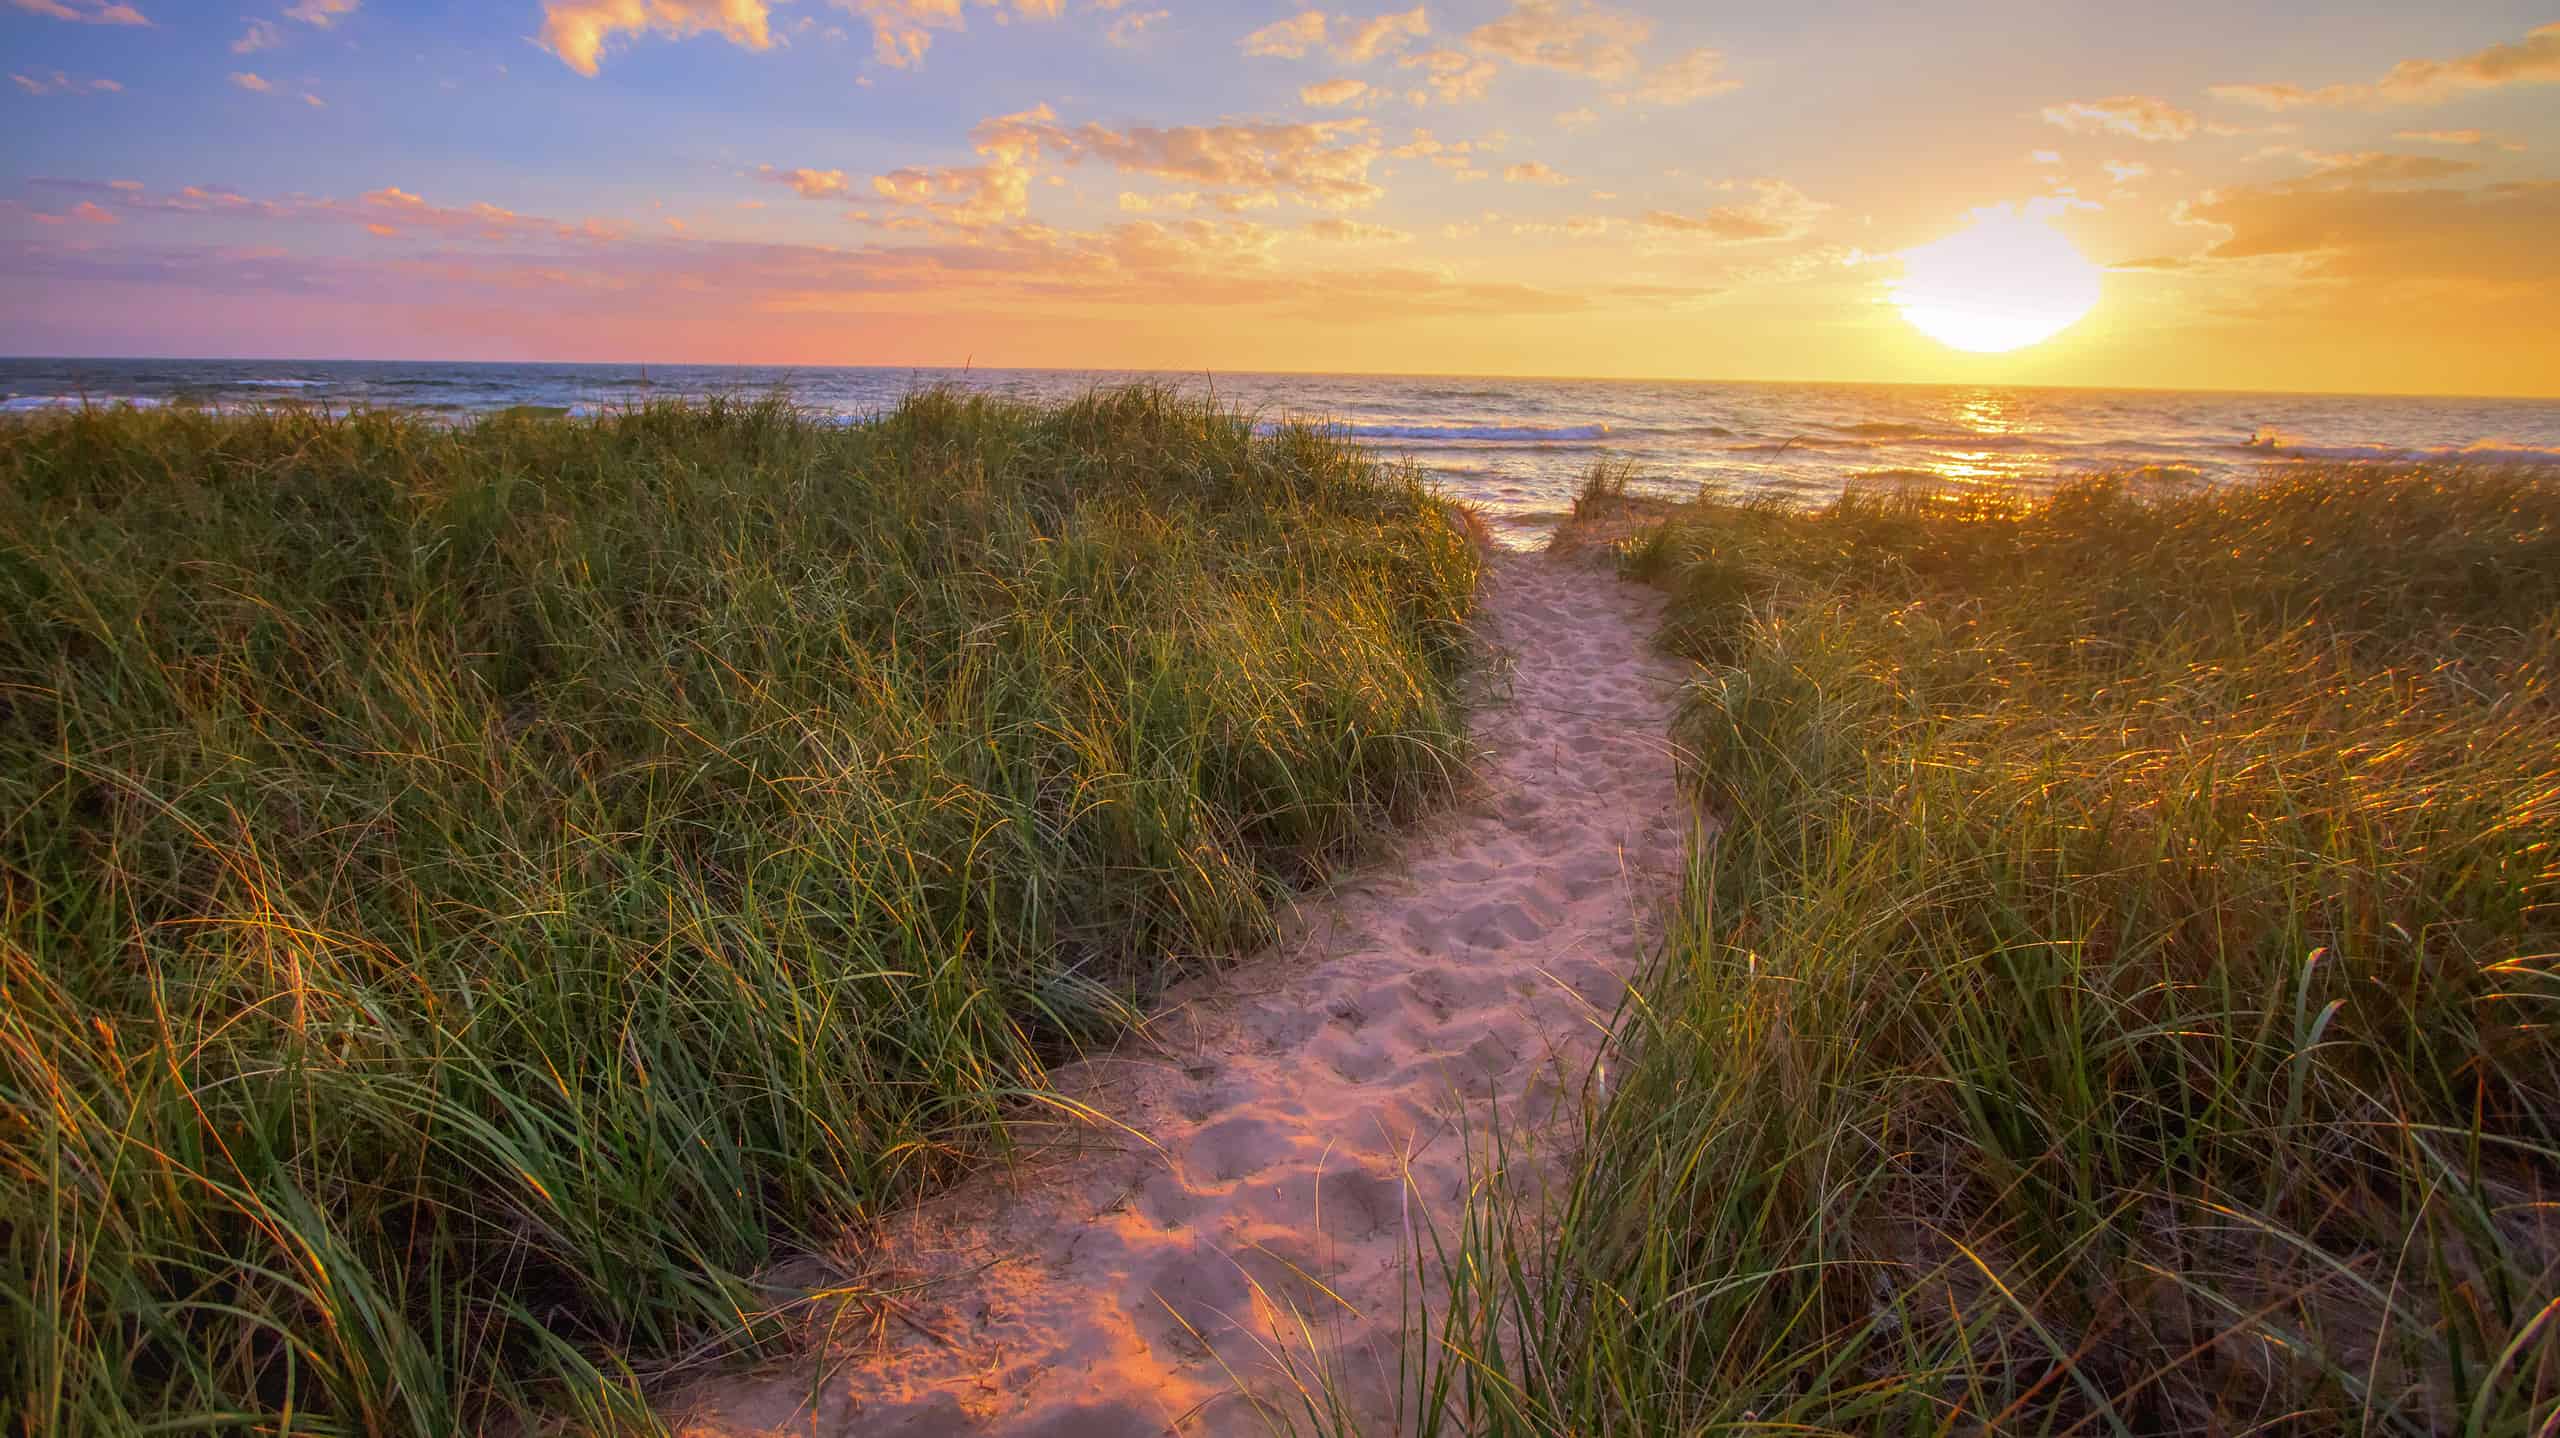 Sandy beach trail winds through dune grass to a sunset horizon on the shores of Lake Michigan in Hofffmaster State Park.